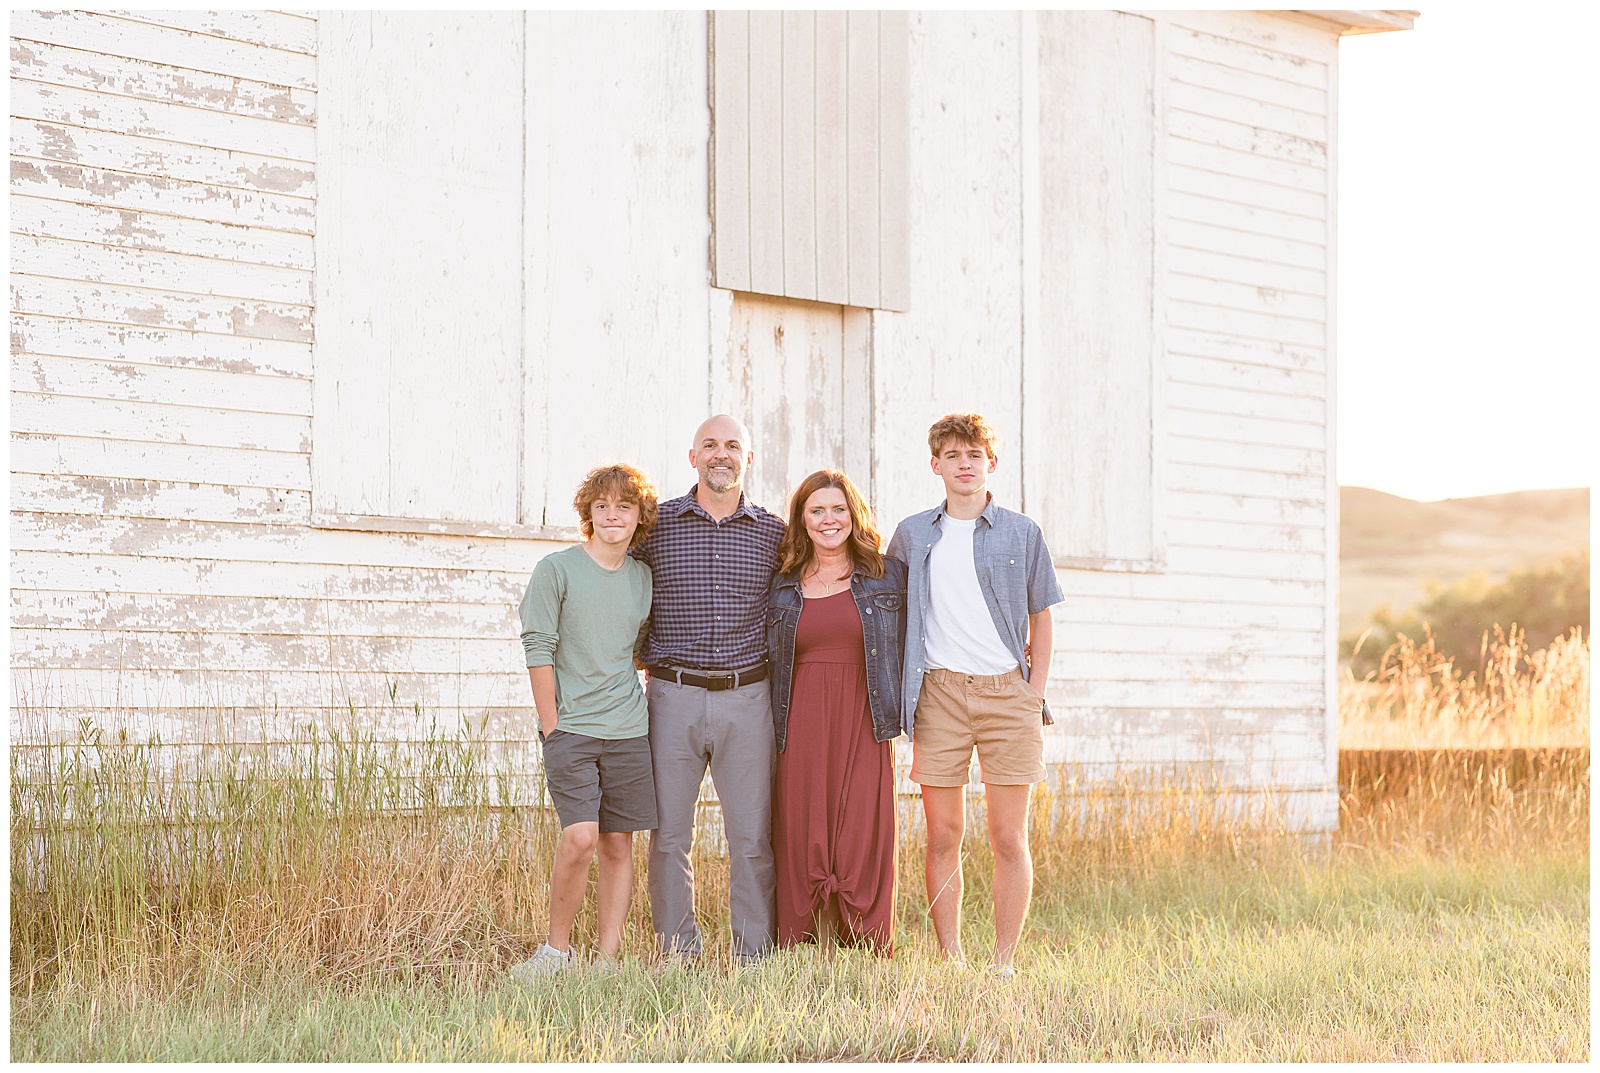 Family of 4, mom, dad, teen boys, smile for family photographer, Rebecca Rice Photography, for their family photography session in North Dakota.